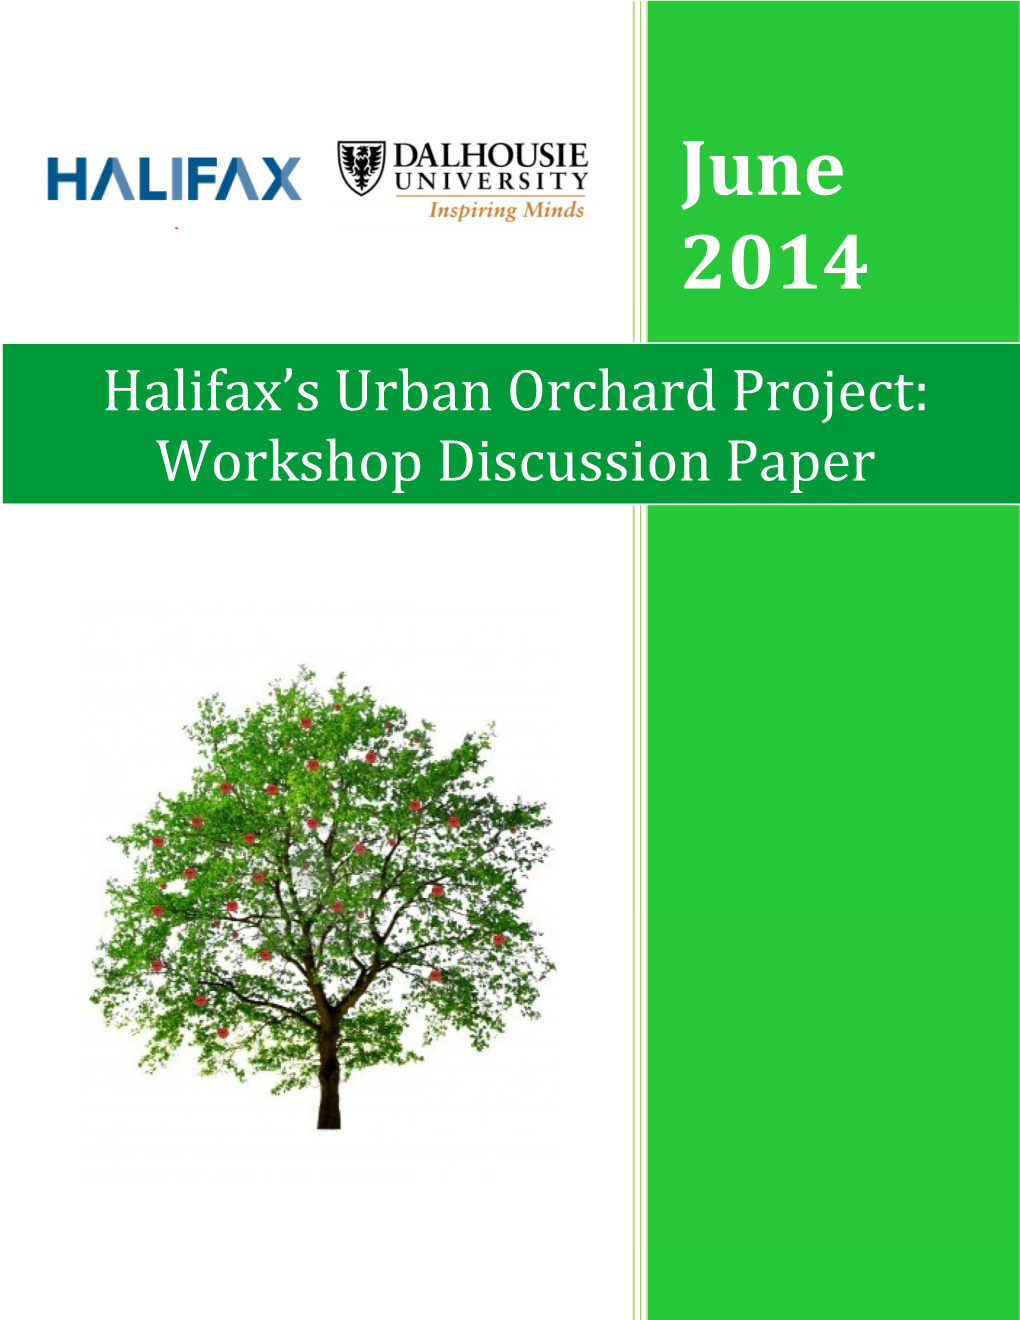 Halifax's Urban Orchard Project: Workshop Discussion Paper